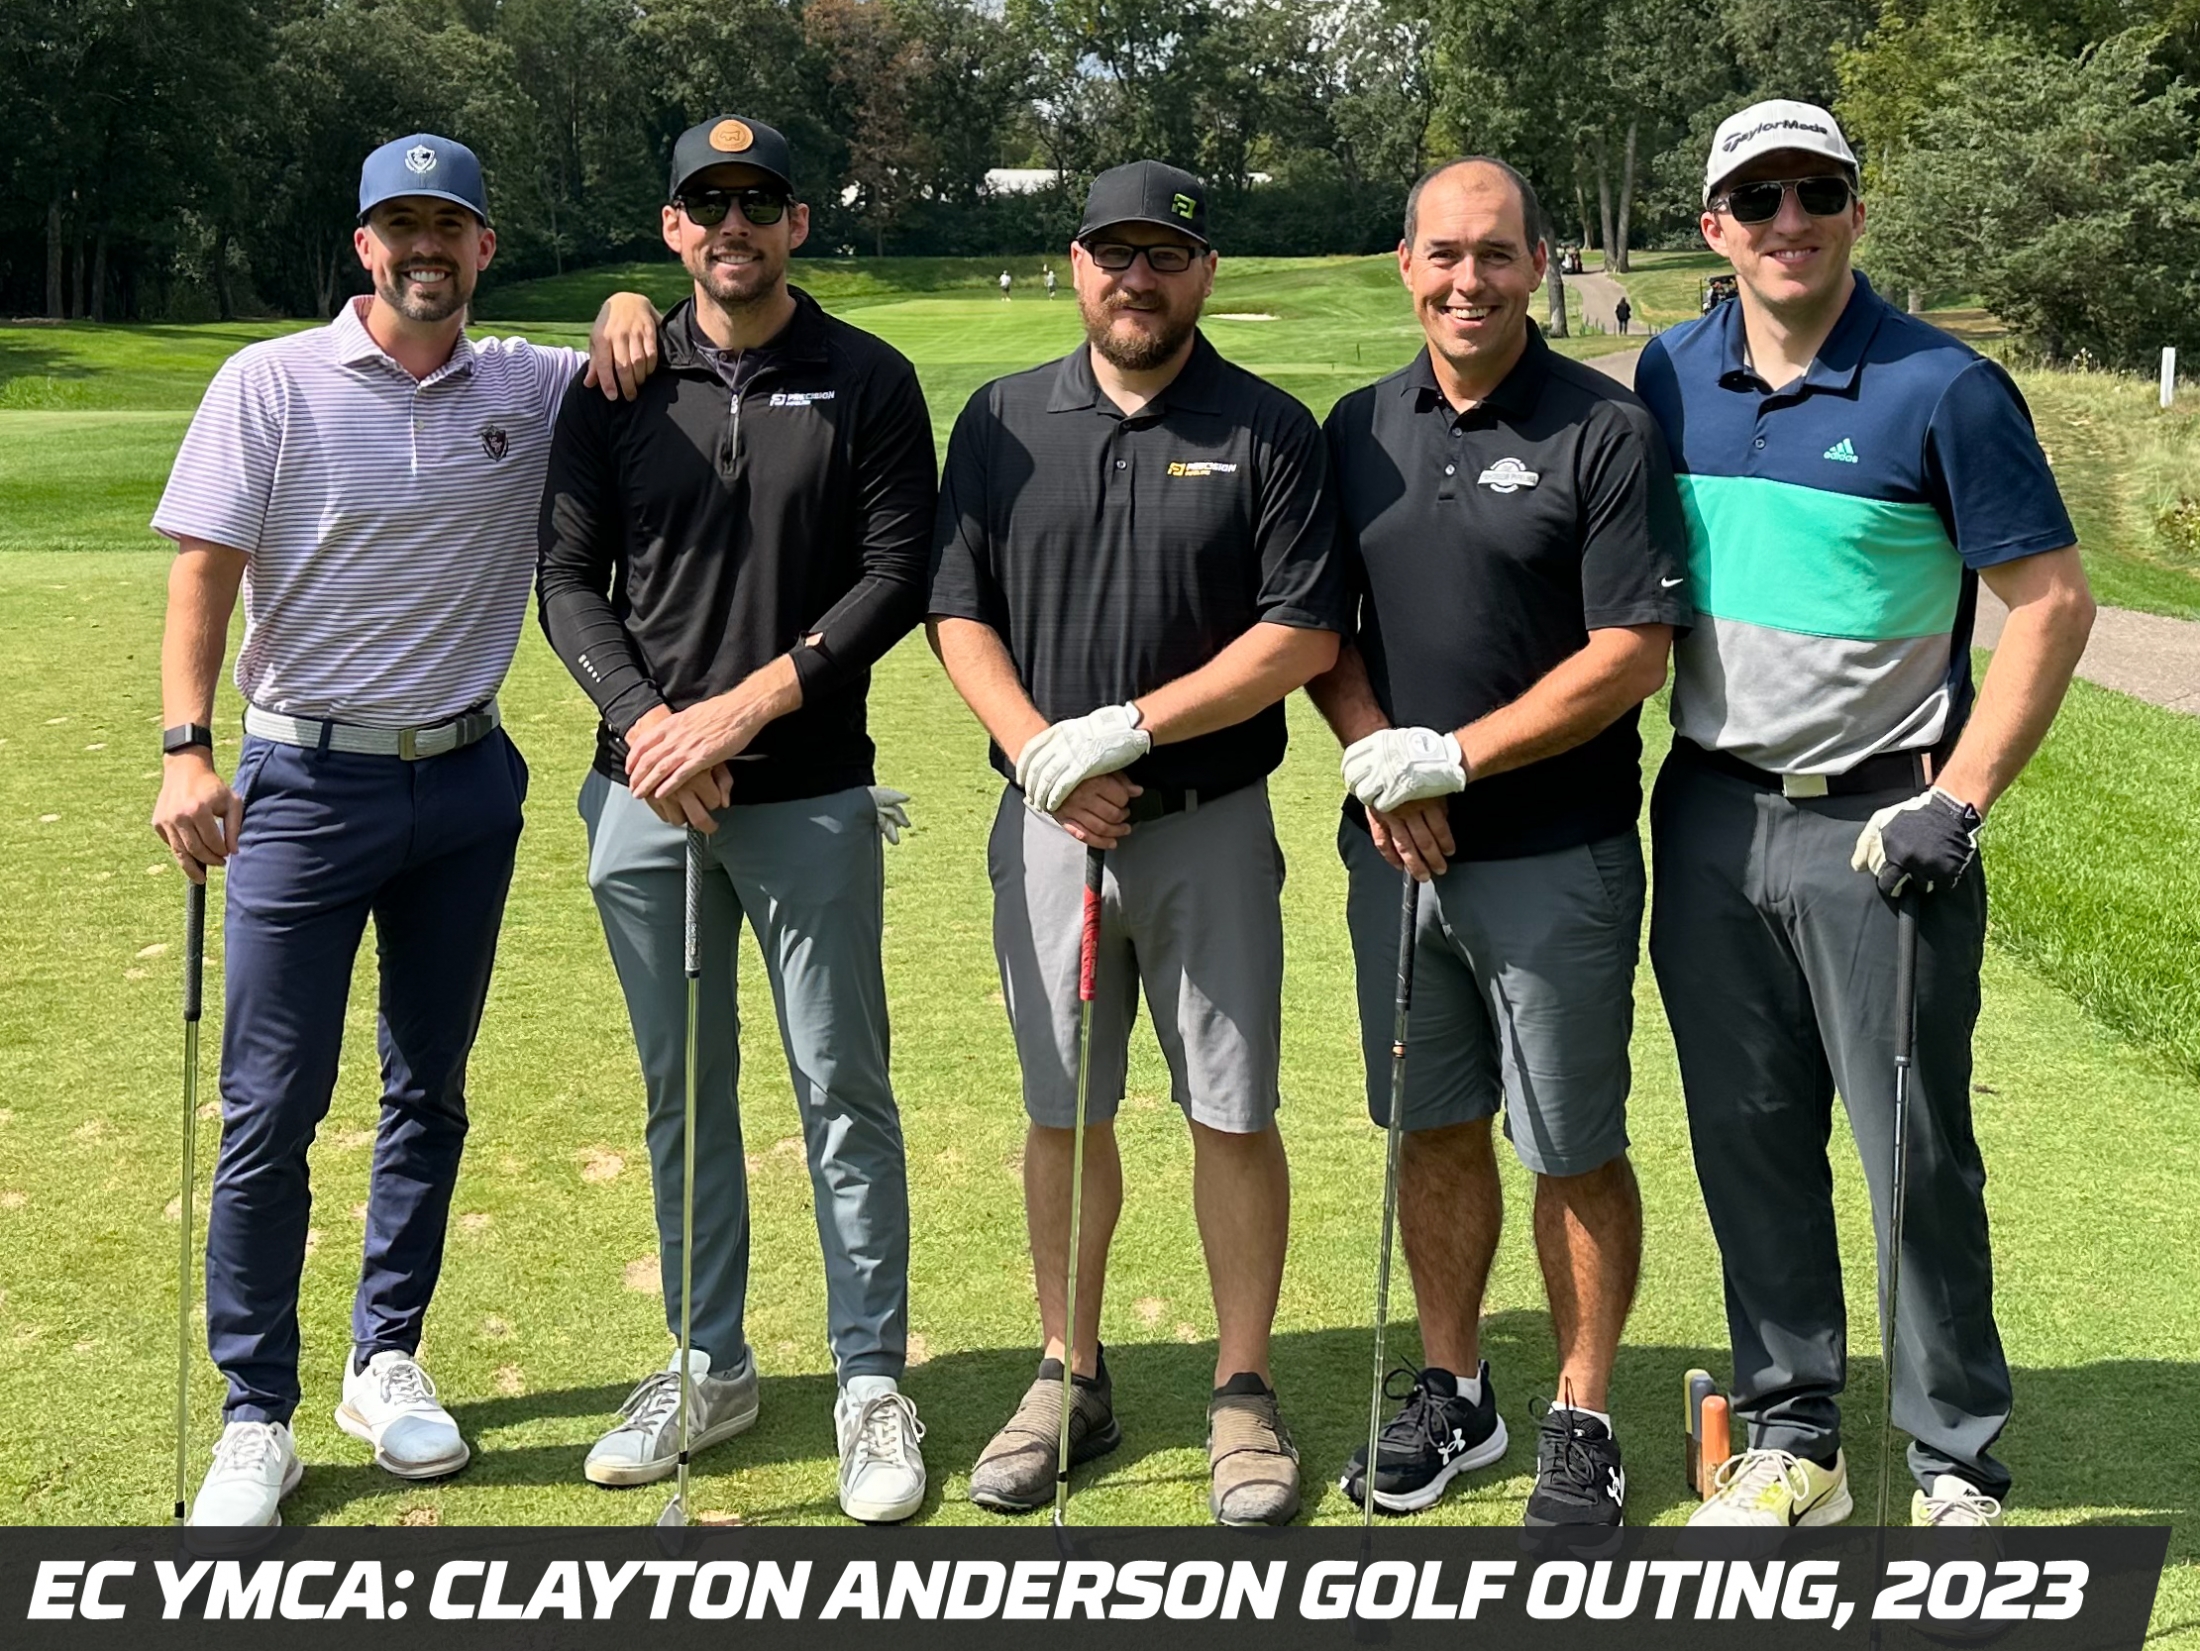 Precision Pipeline Community Involvement: Eau Claire YMCA-Clayton Anderson Golf Outing, 2023